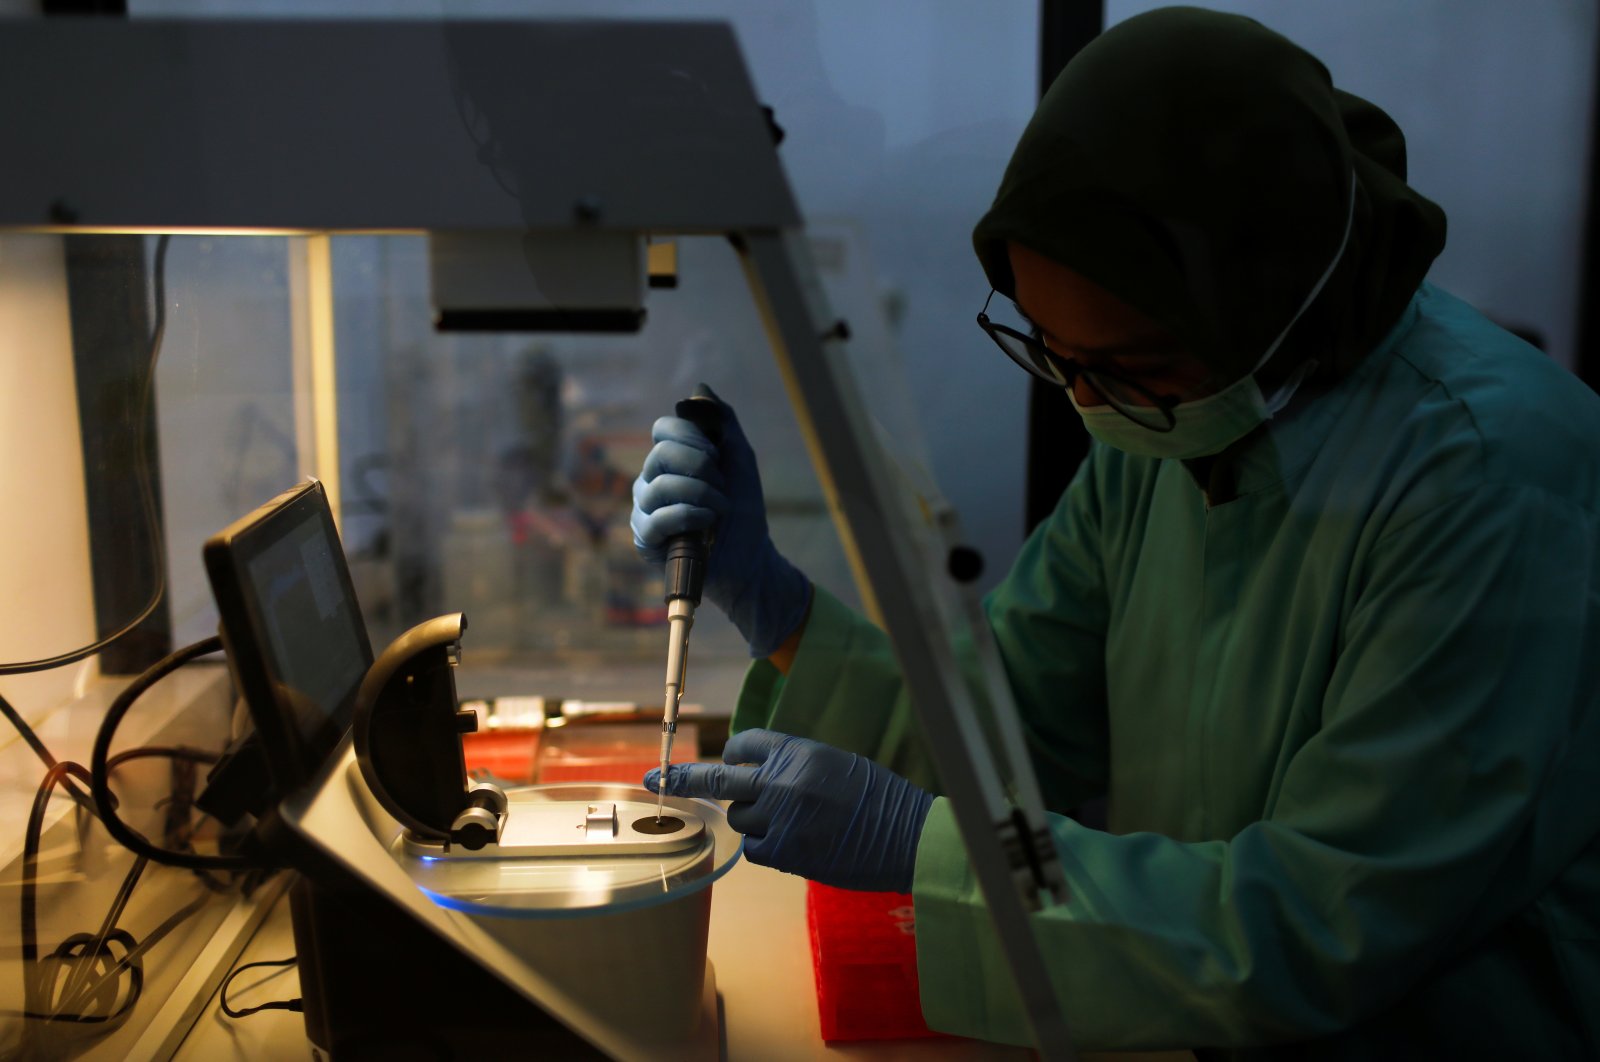 An analyst of the Global Halal Centre works at a laboratory where Sinovac's vaccine for the coronavirus was analyzed for halal certification, in Bogor, Indonesia, Jan. 6, 2021. (Reuters Photo)